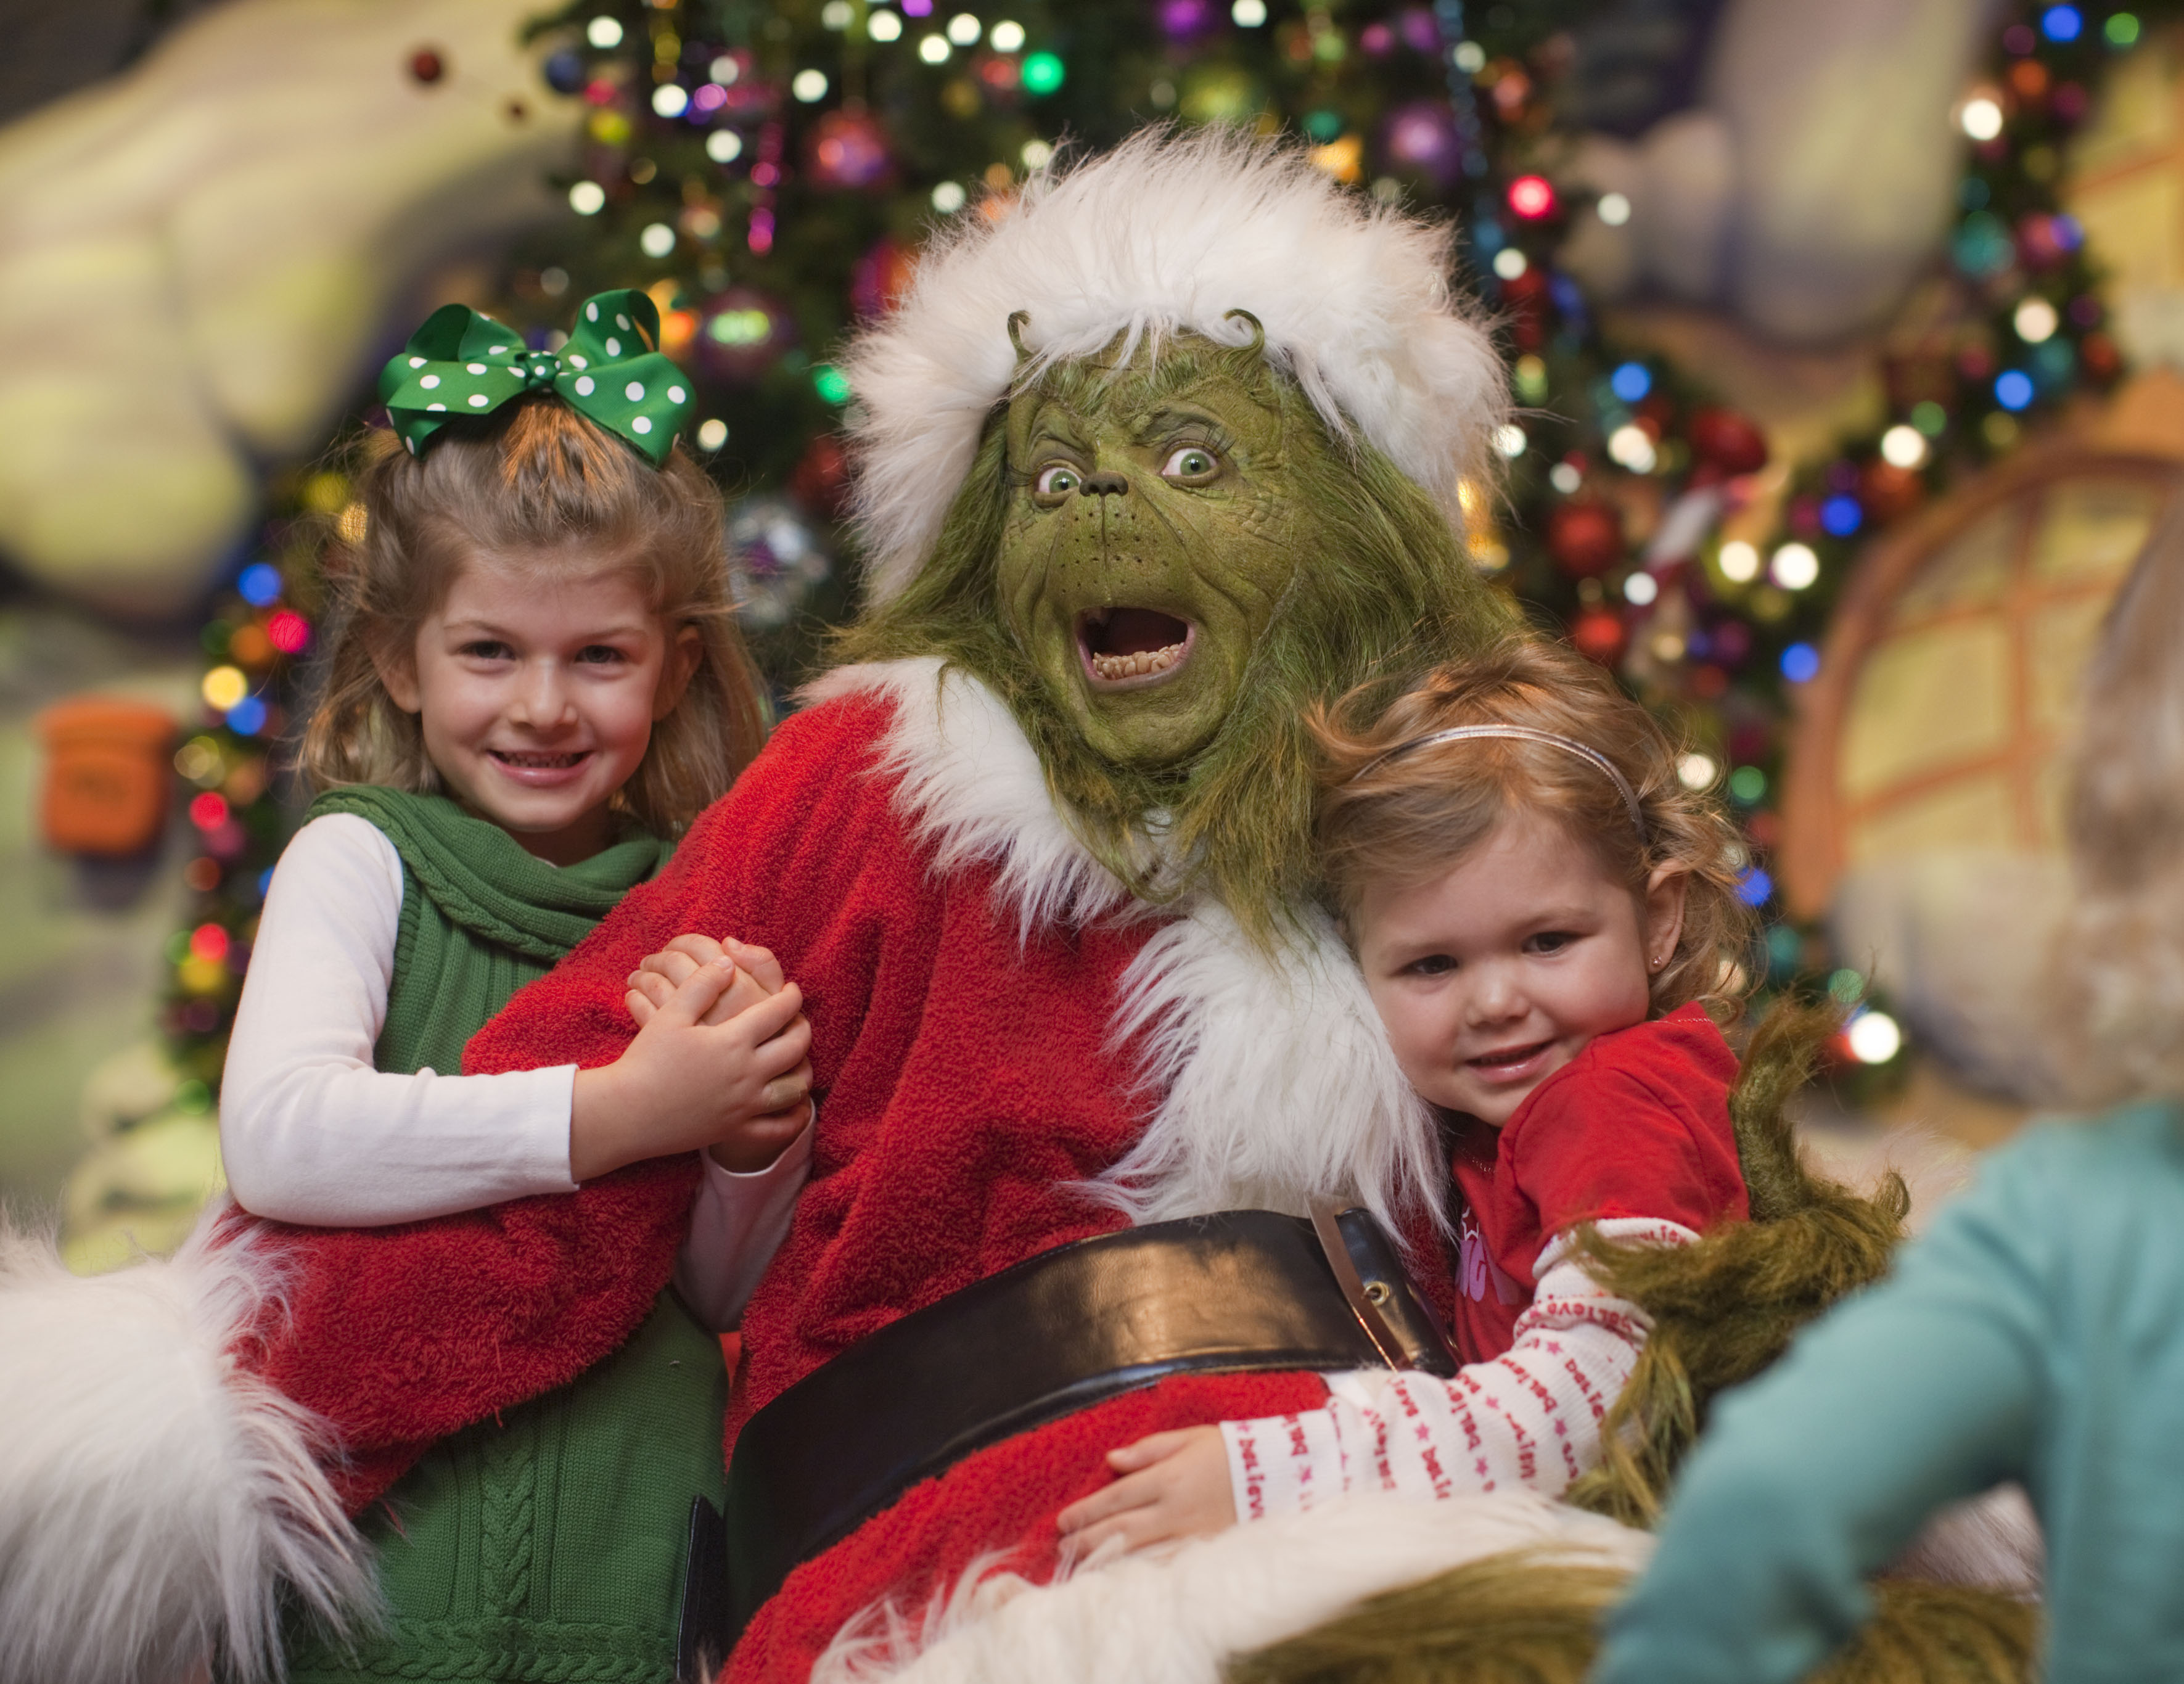 Interview With the Grinch Star of Universal Orlando's Grinchmas Speaks